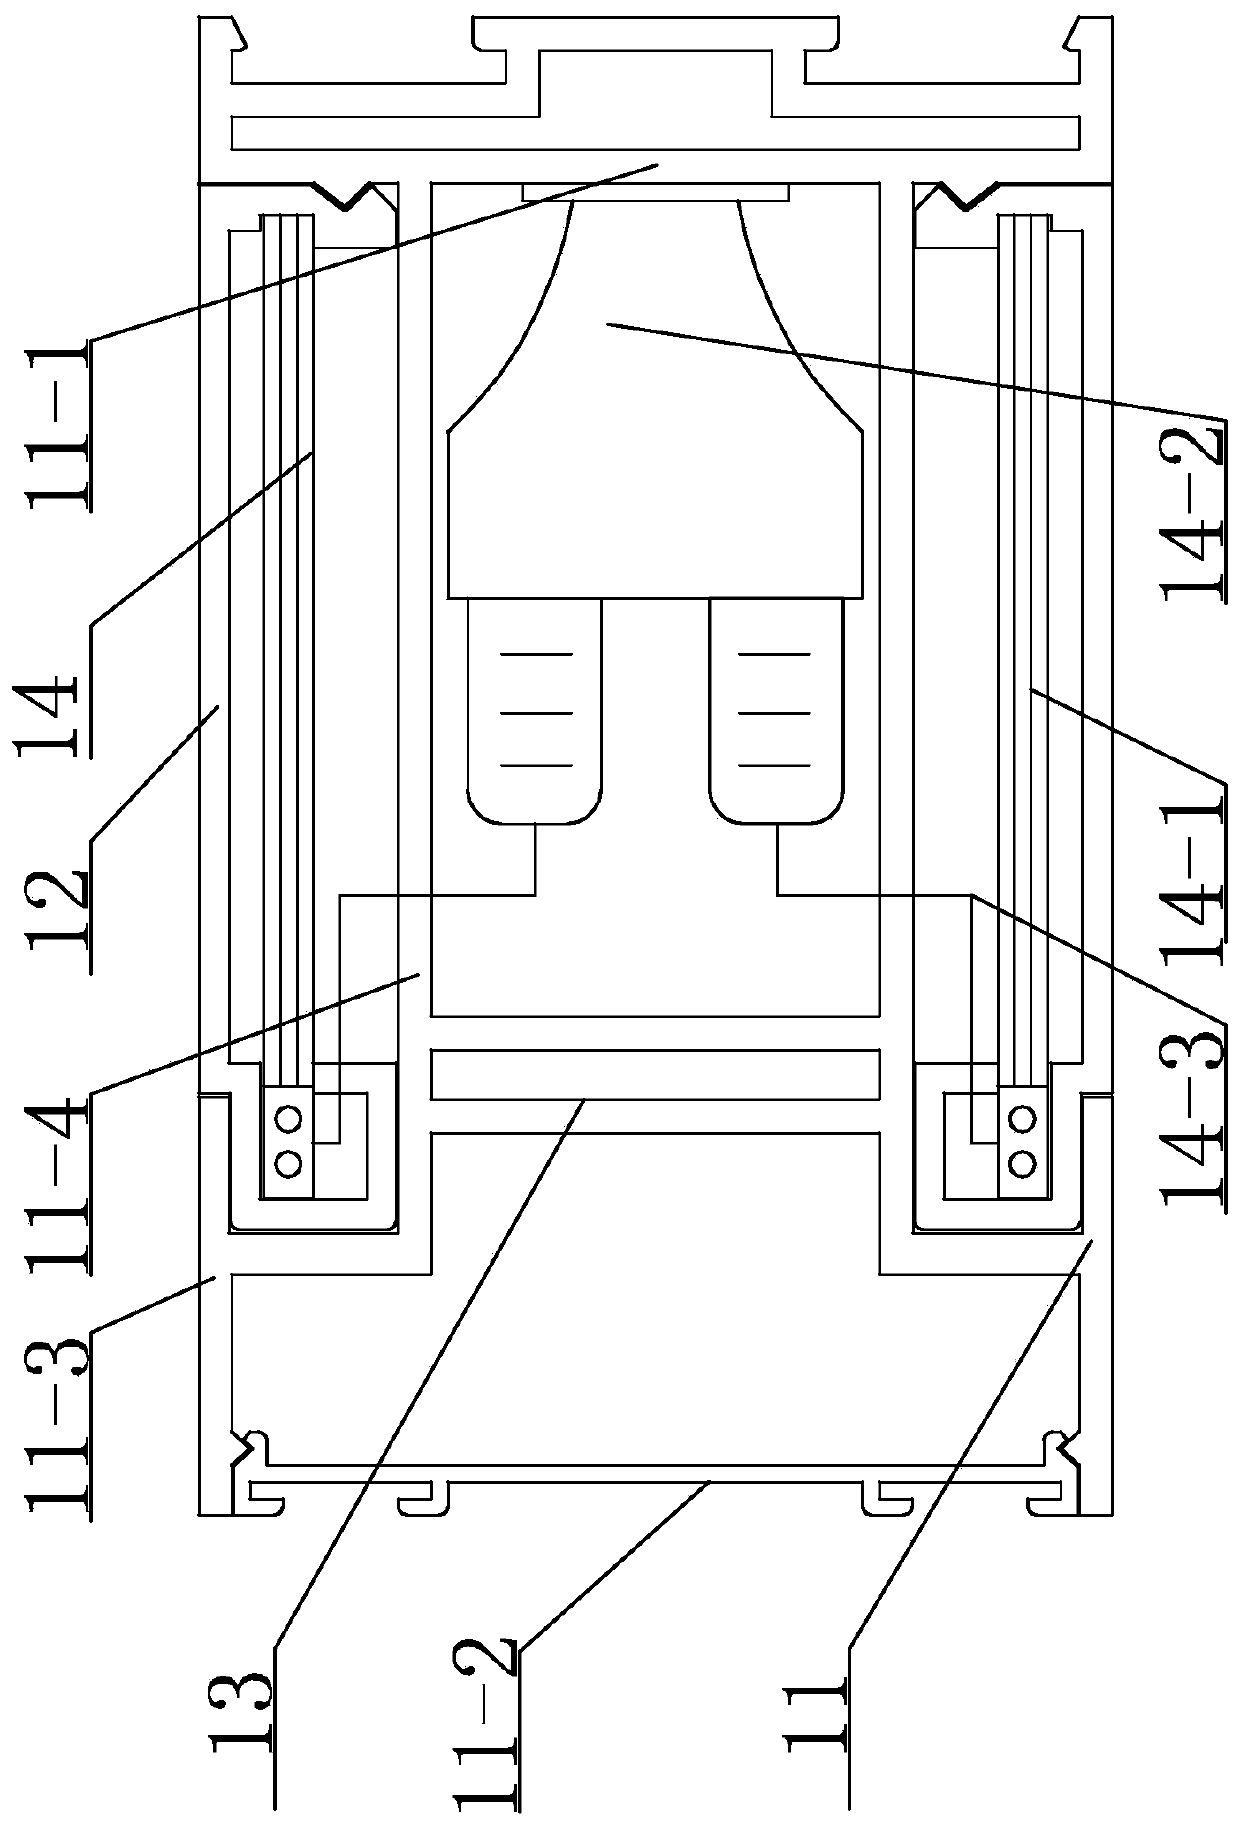 Door and window sectional material with light emitting assembly